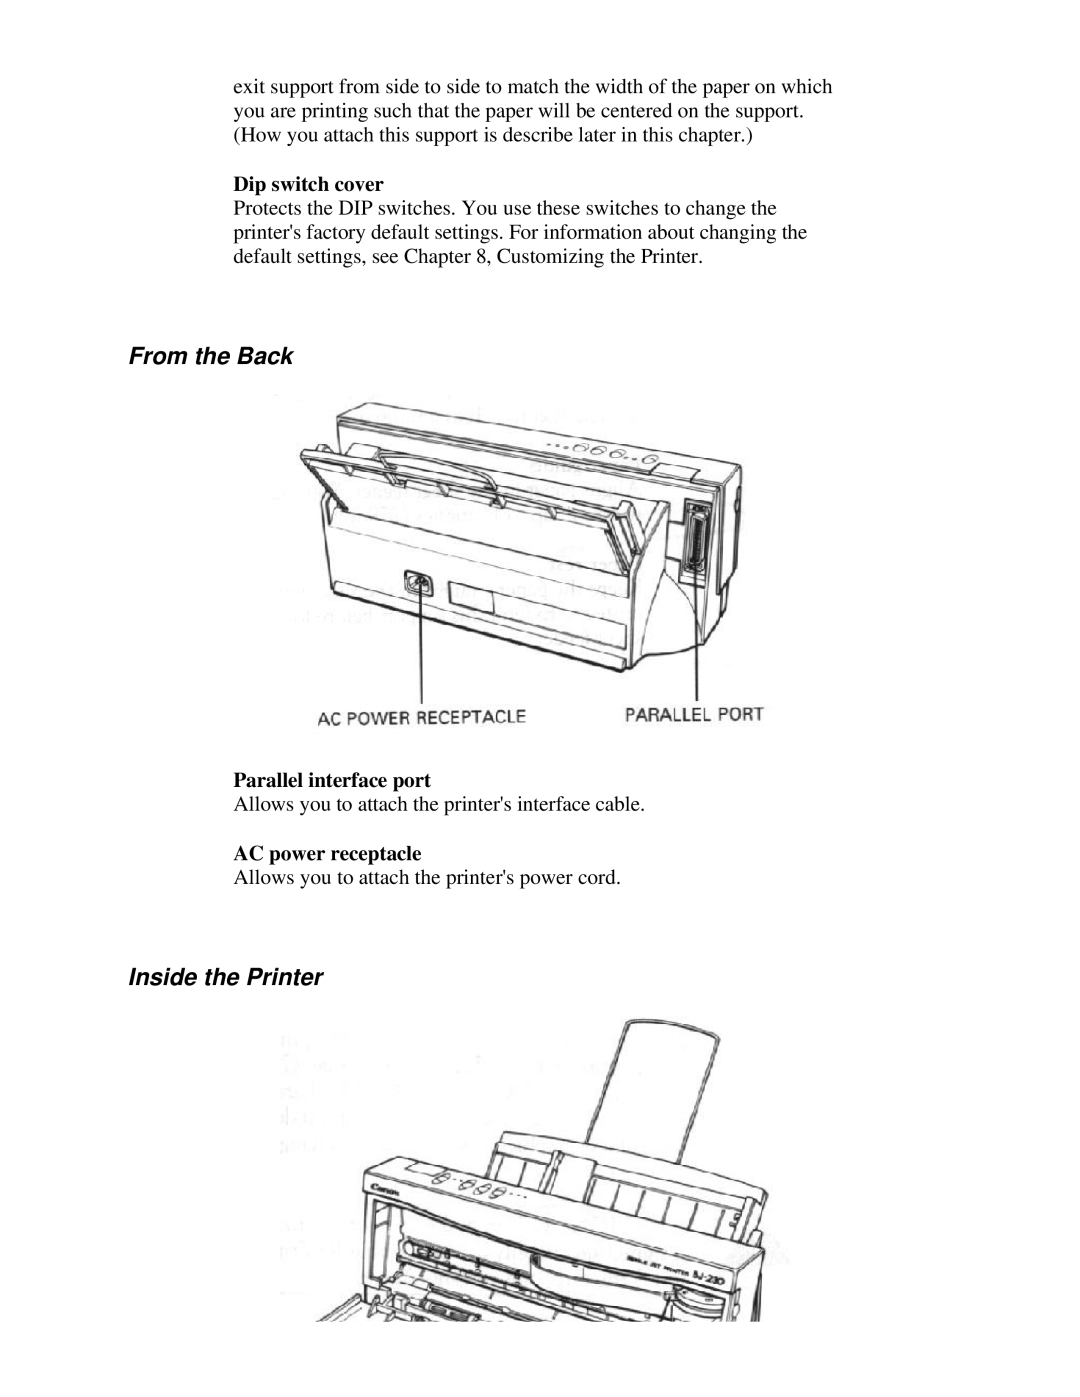 Canon BJ-230 user manual From the Back, Inside the Printer, Dip switch cover, Parallel interface port, AC power receptacle 